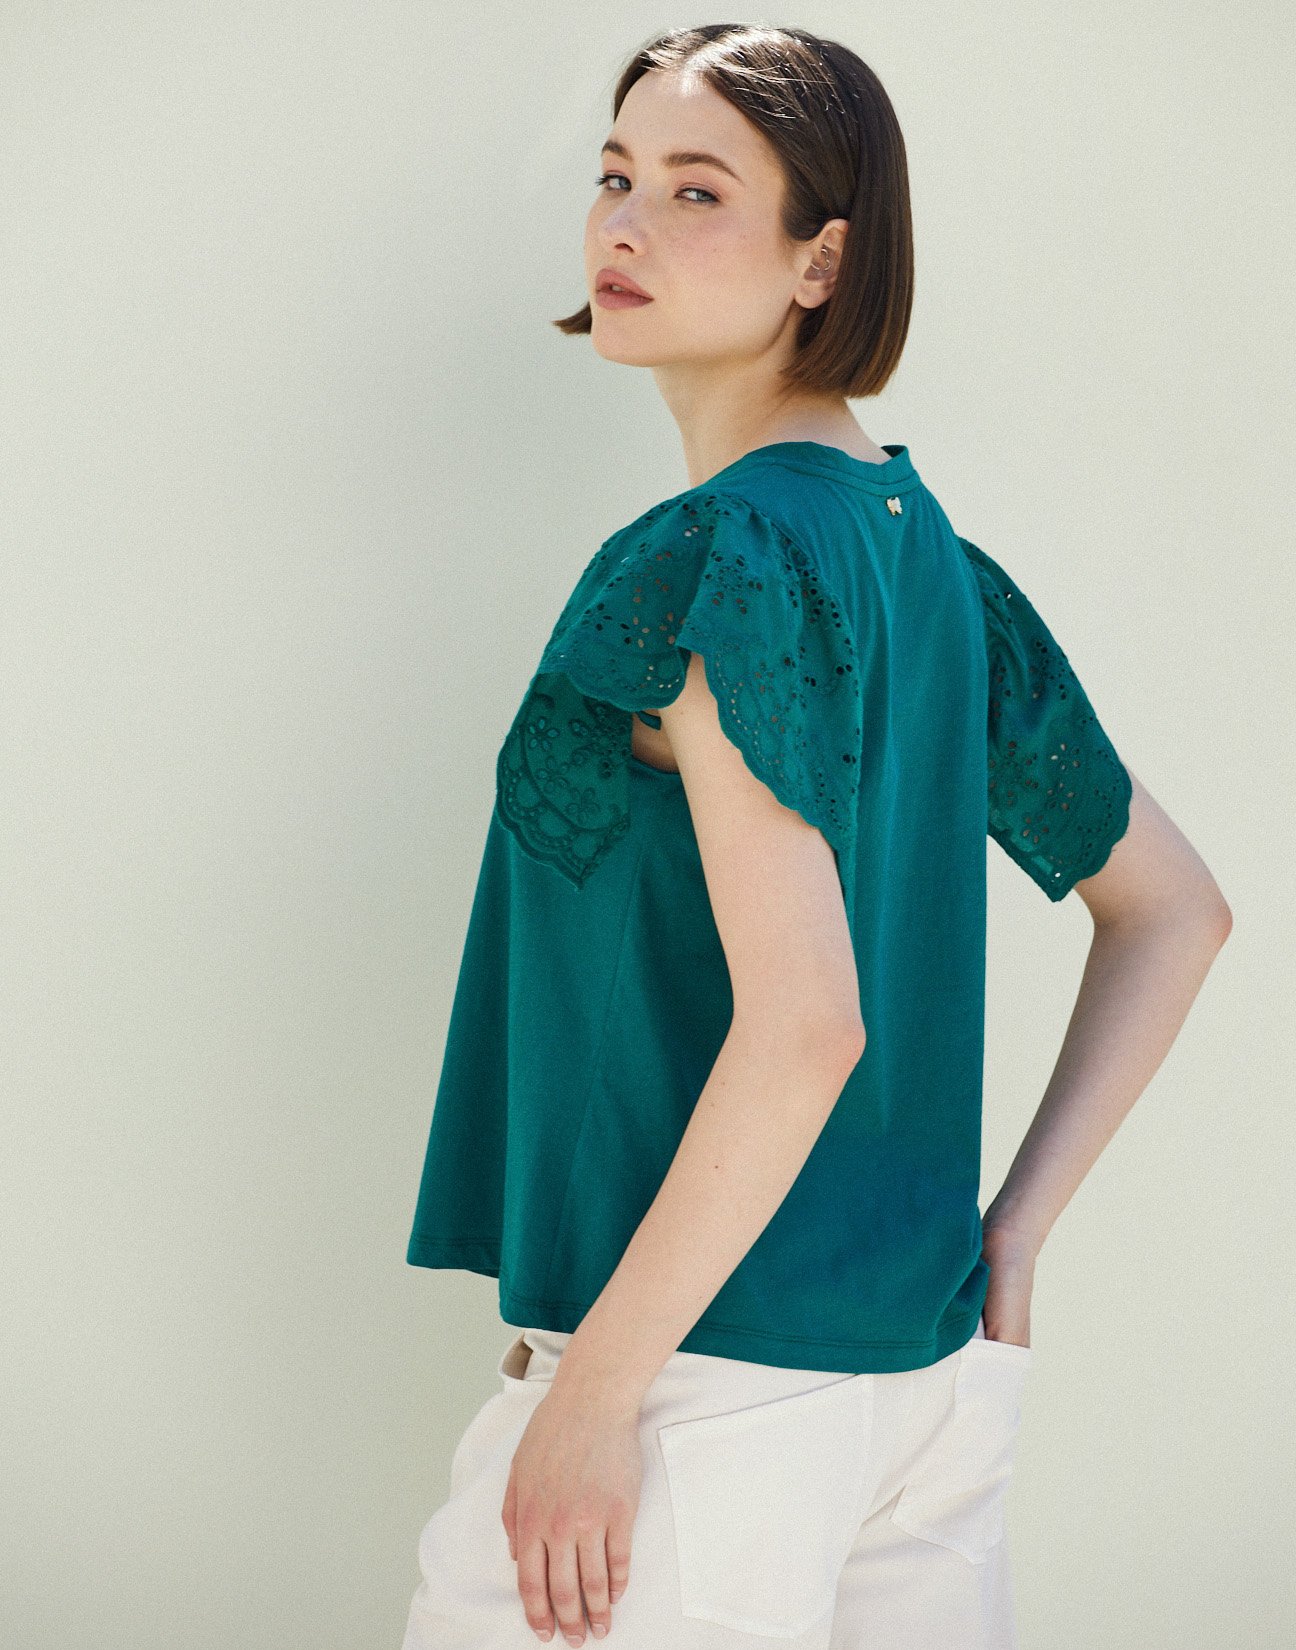 Top with embroidery sleeves